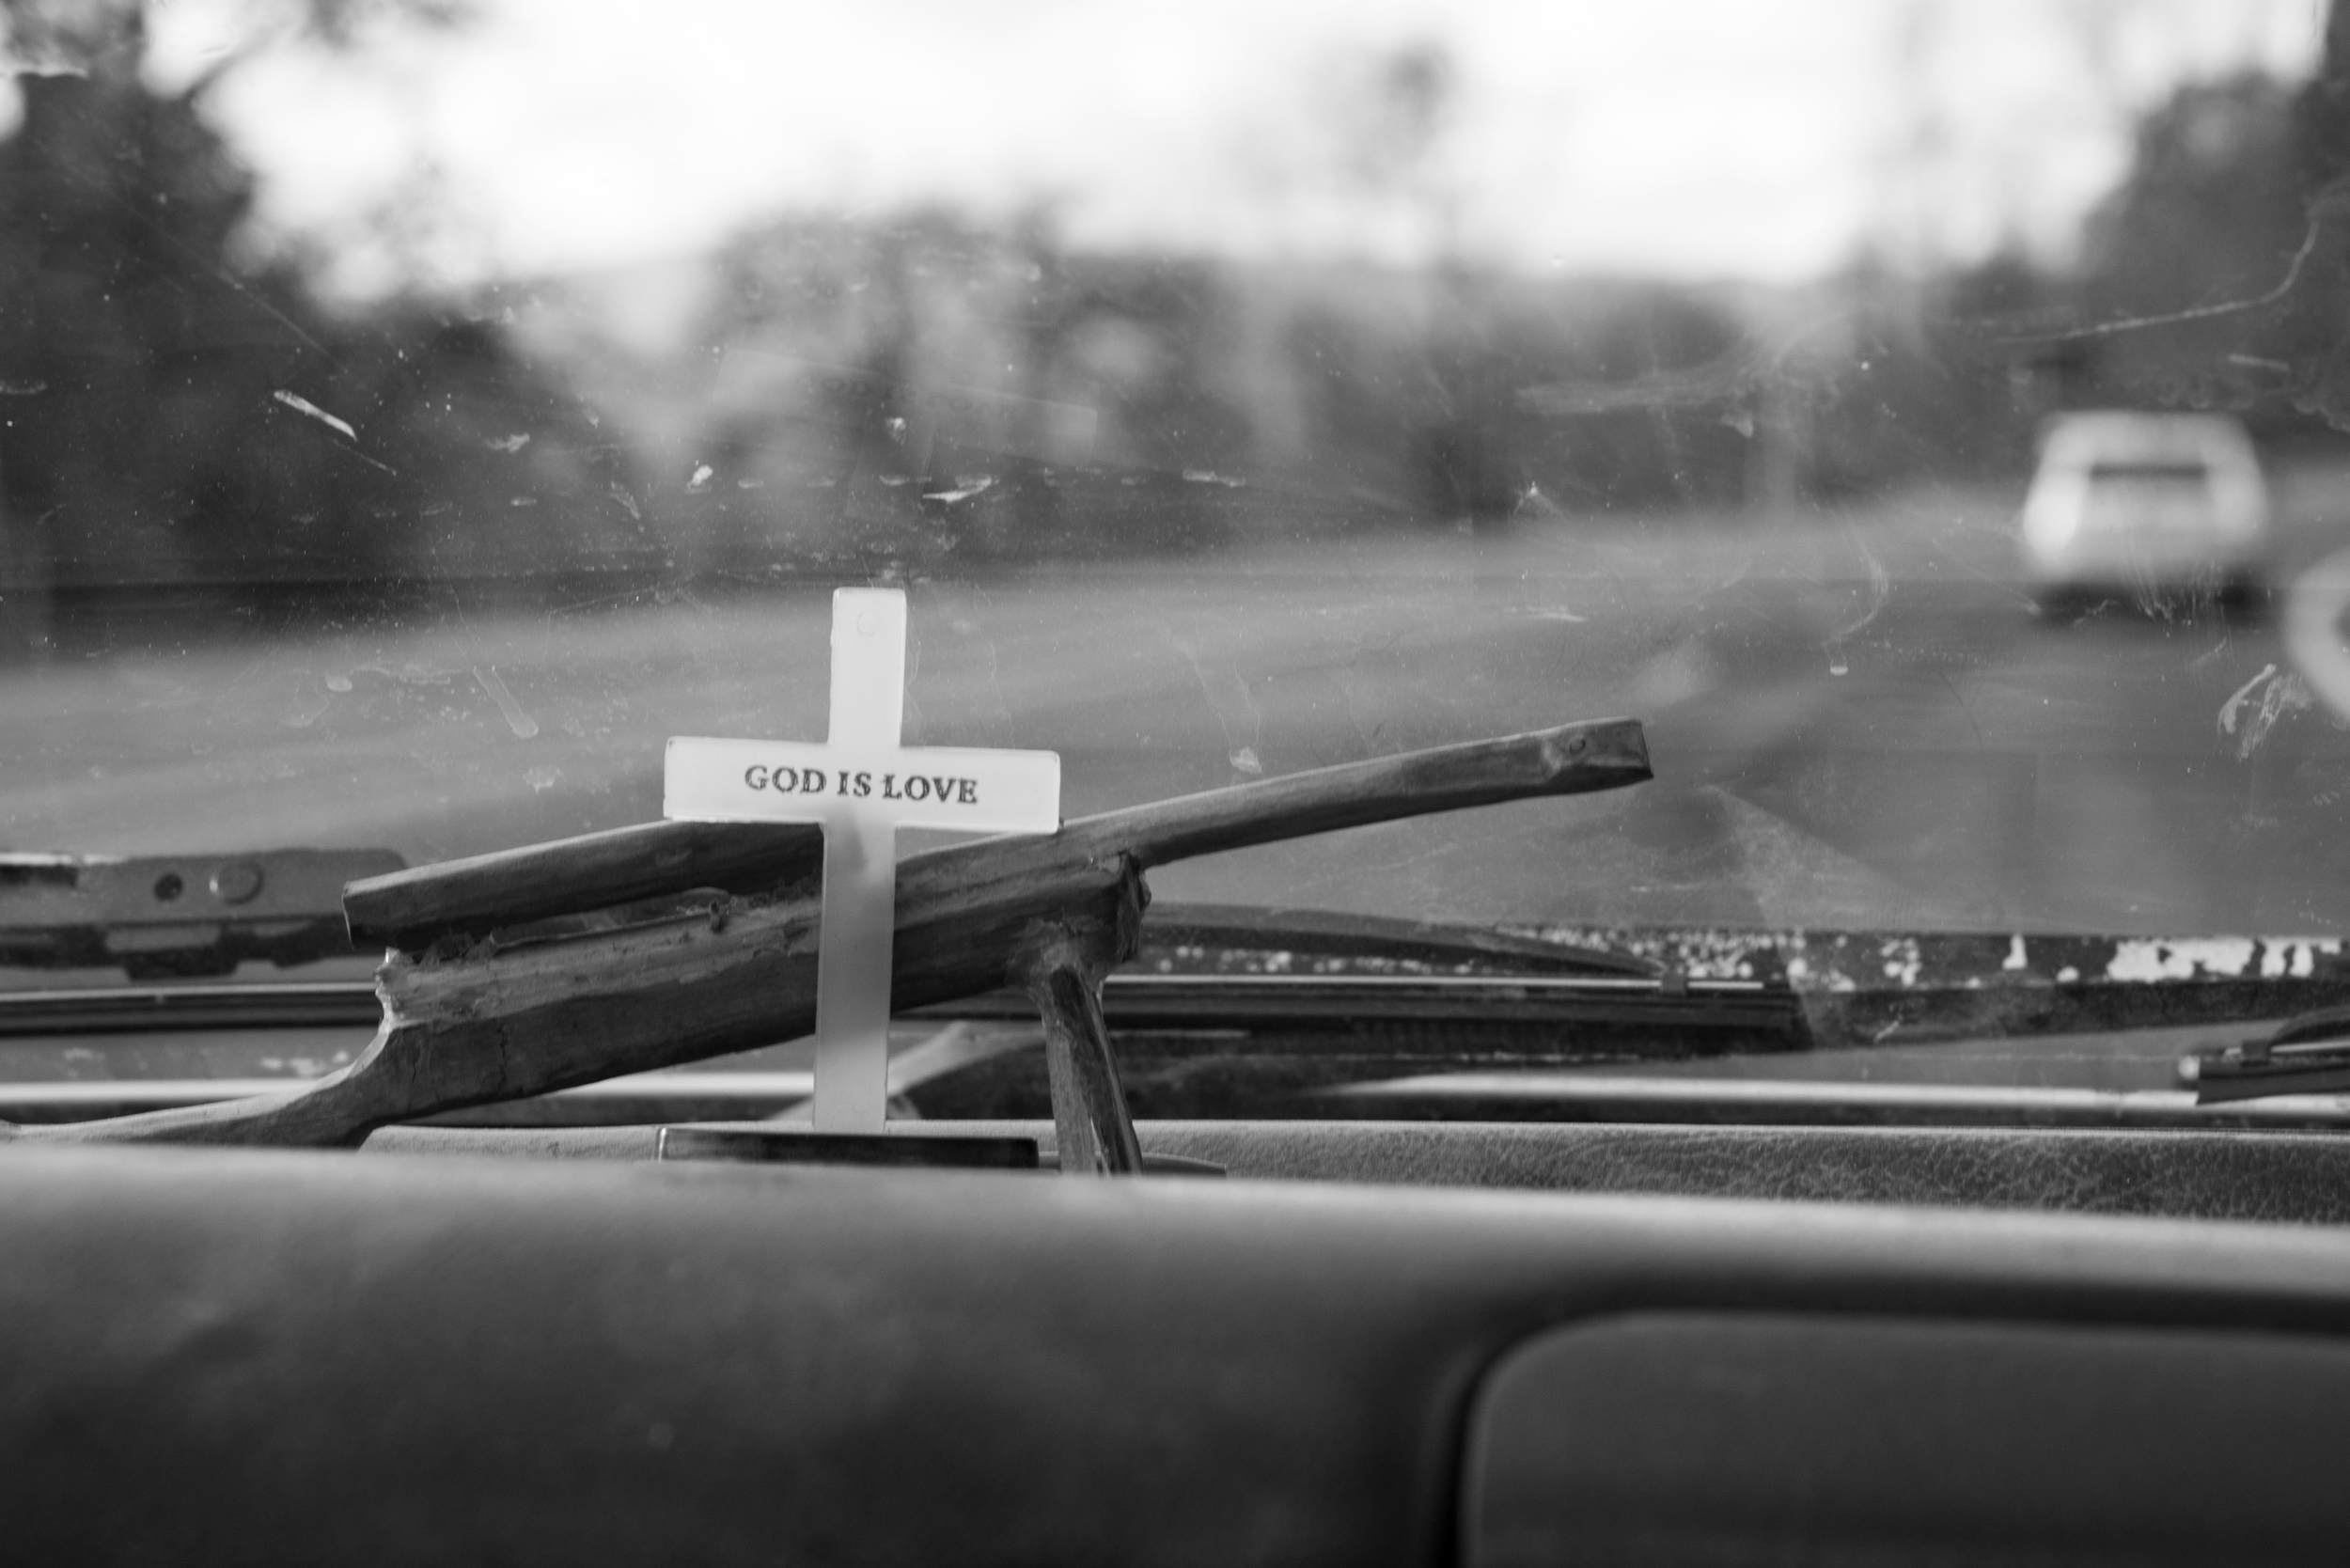  Staley's dashboard décor is a memory of a friend and a reminder of his faith. Through economic hardships, reminders like this keep him centered. 